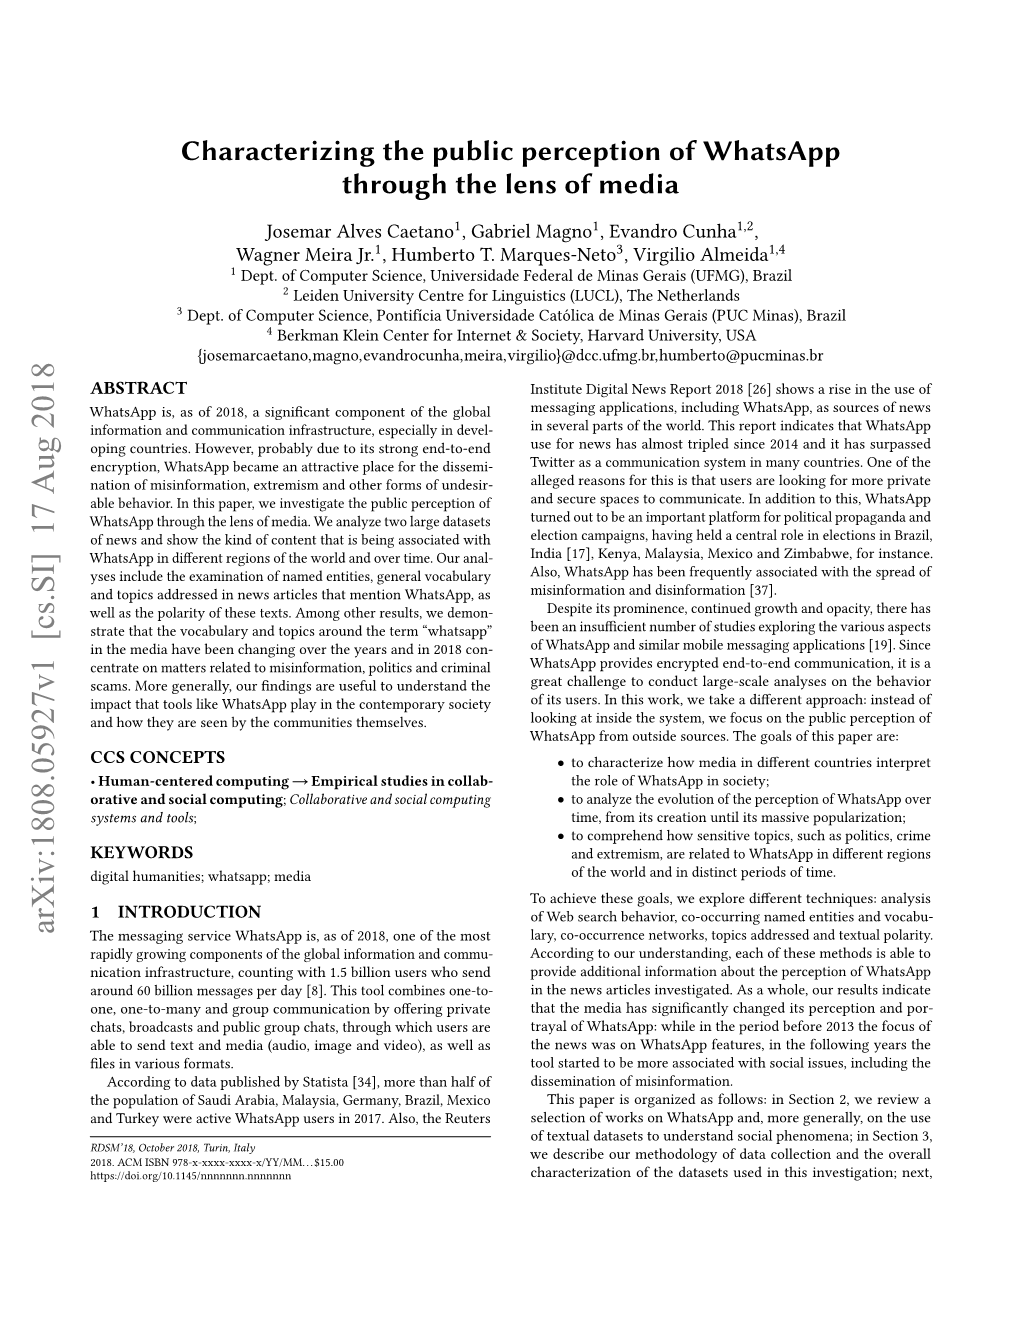 Characterizing the Public Perception of Whatsapp Through the Lens of Media